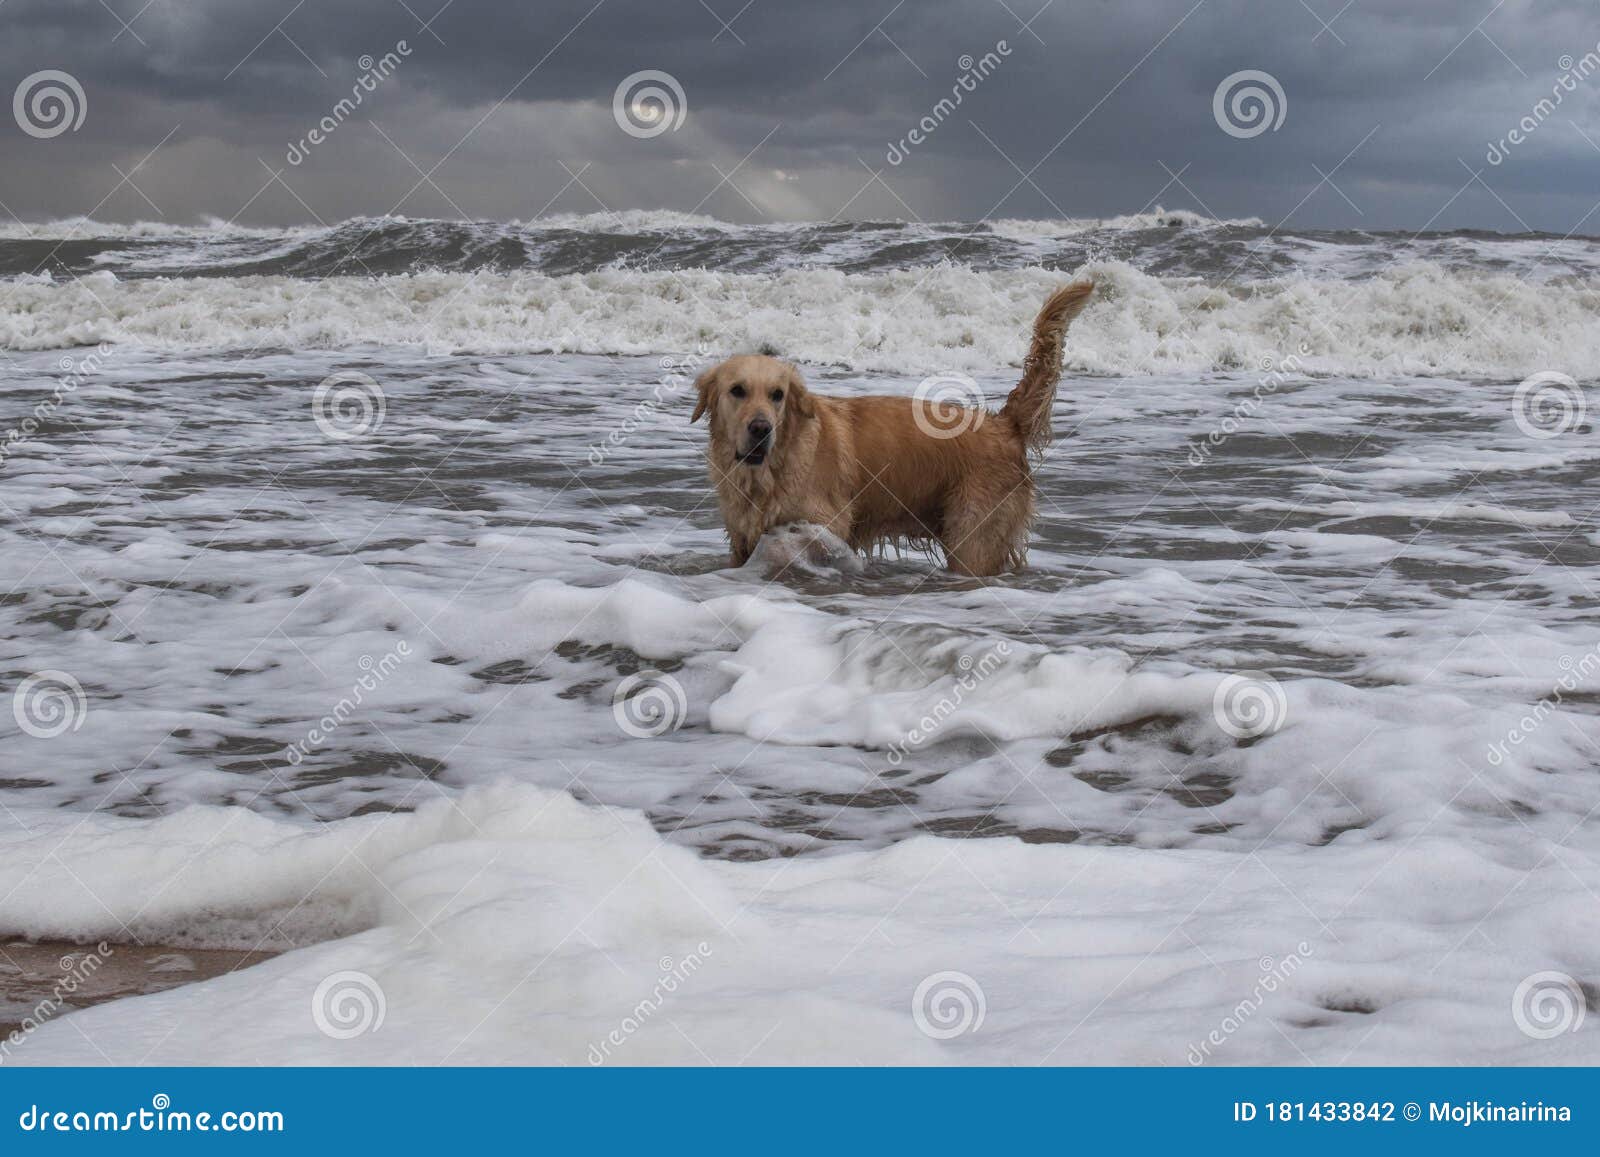 sea foam is the rarest phenomenon that can be seen on the coast by the sea or ocean and it bathes a dog, a storm and a dog in a st